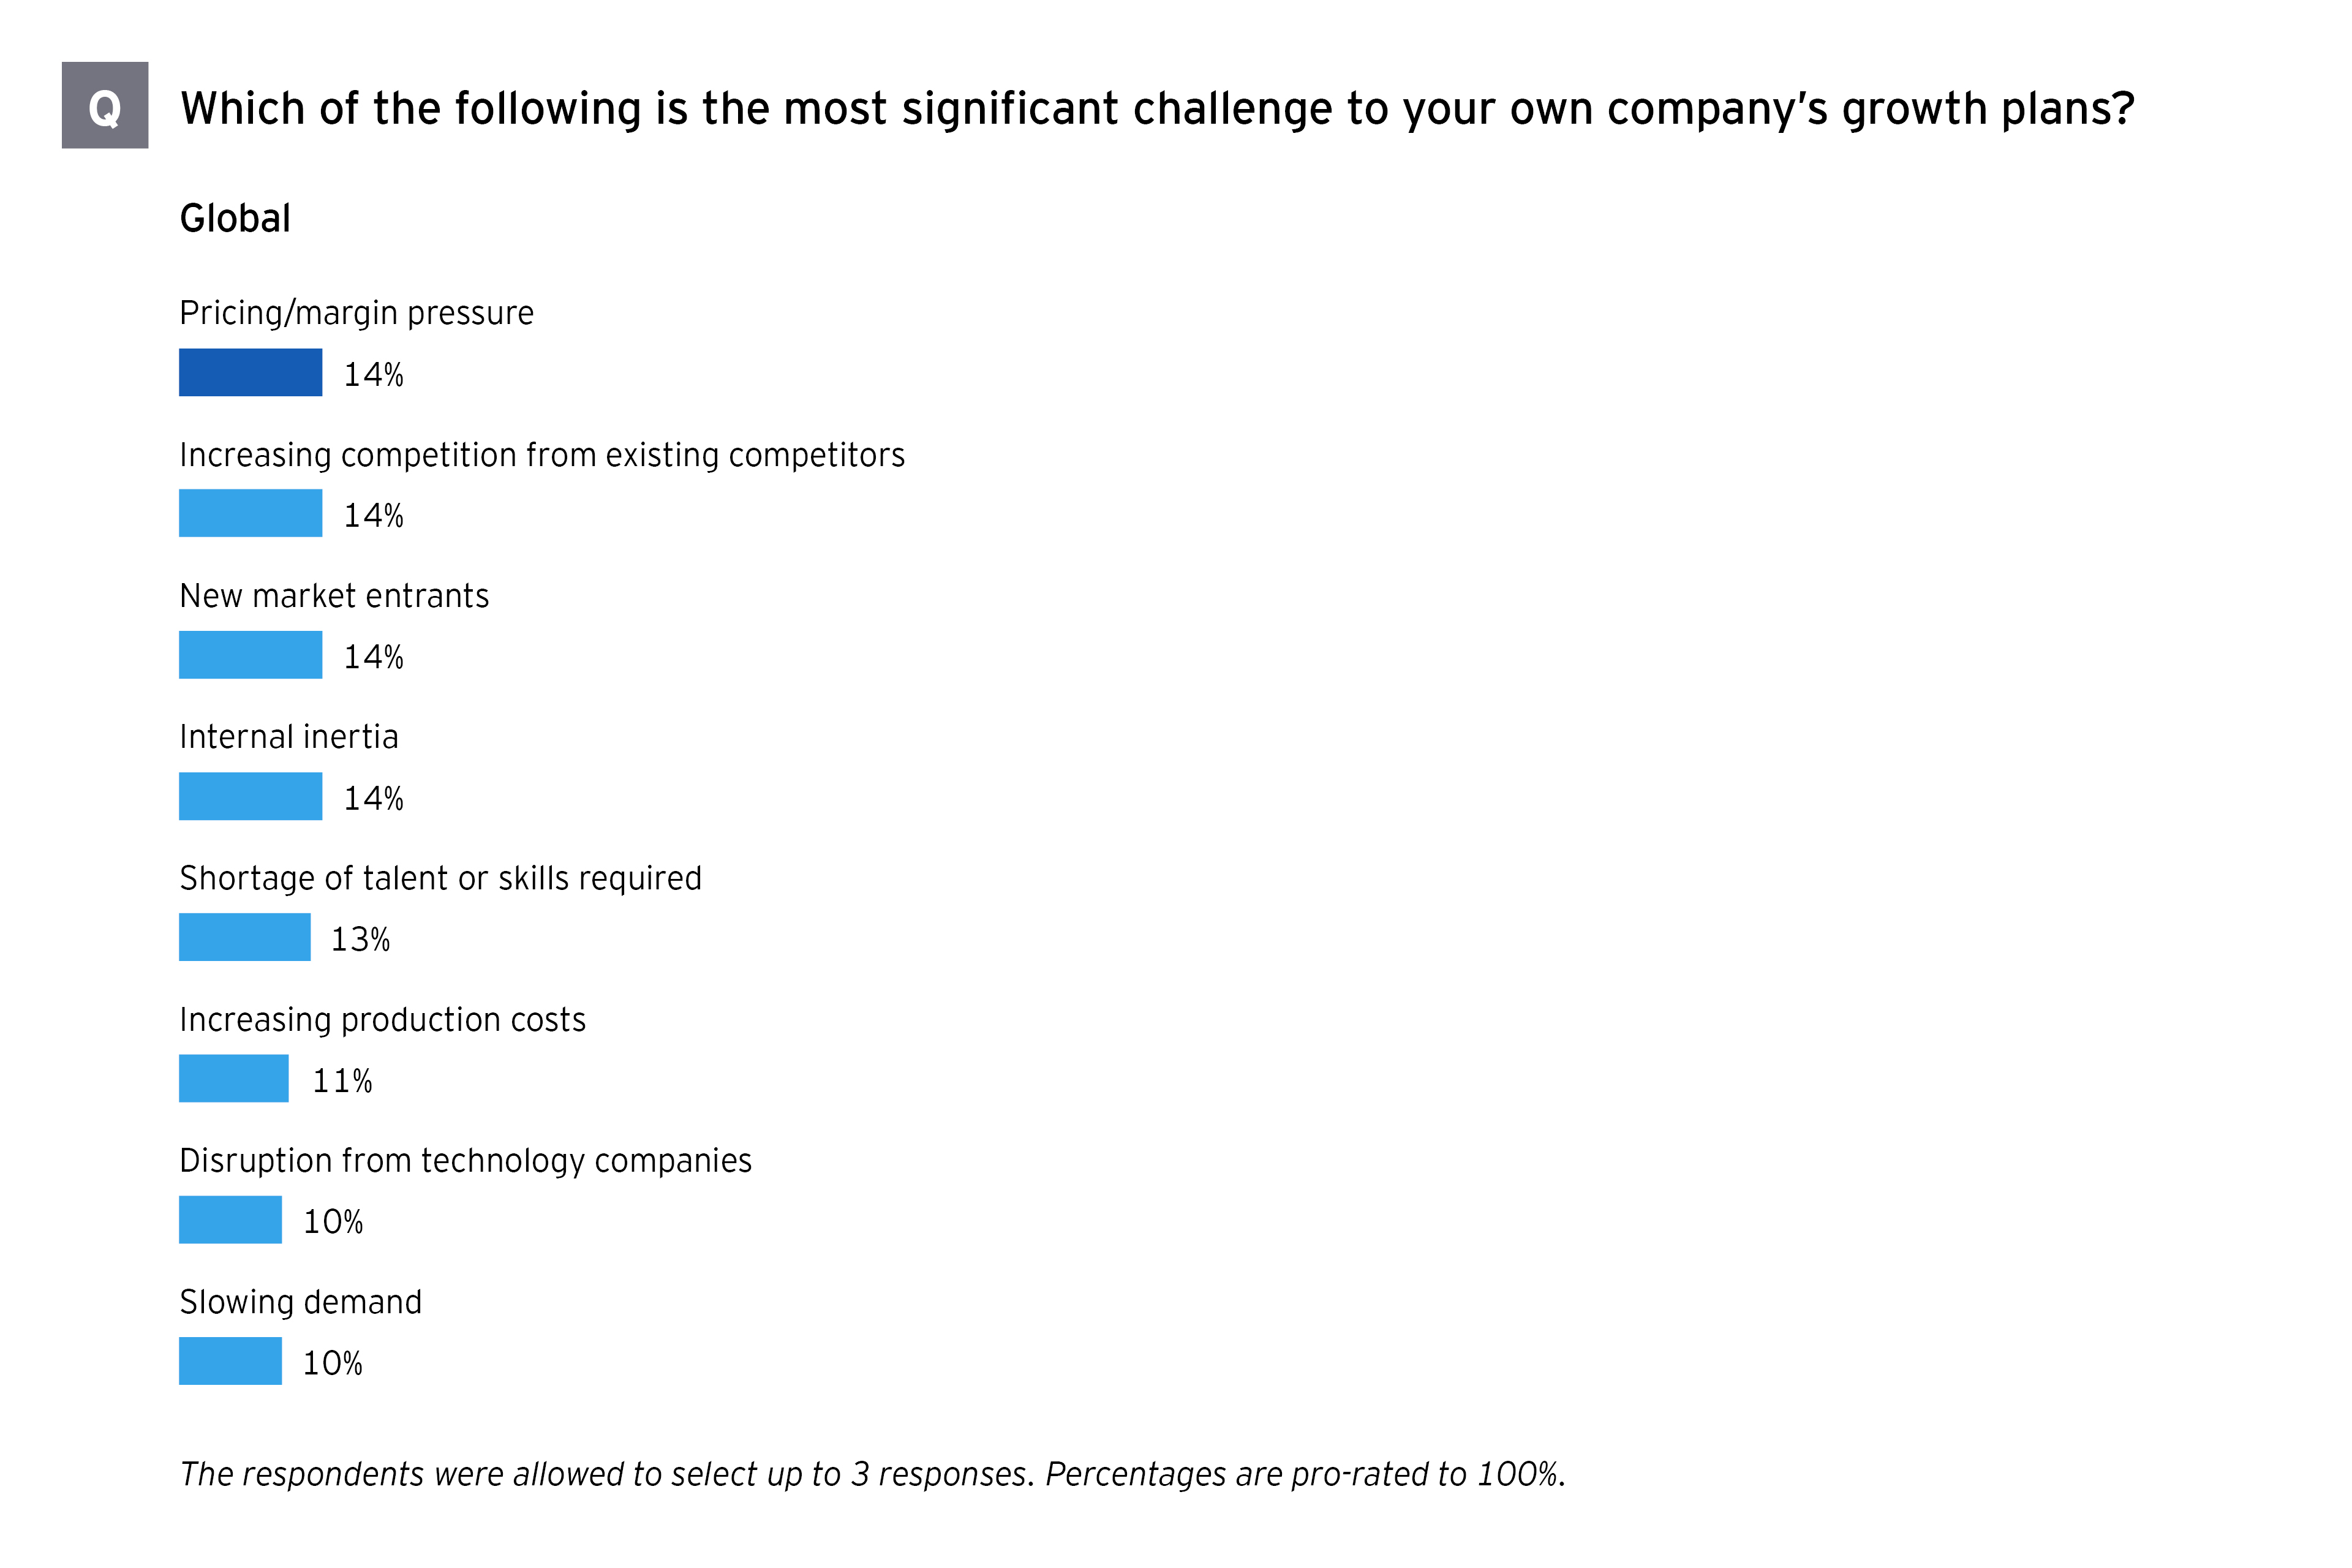 M&A survey Australasia challenge to own company’s growth plans